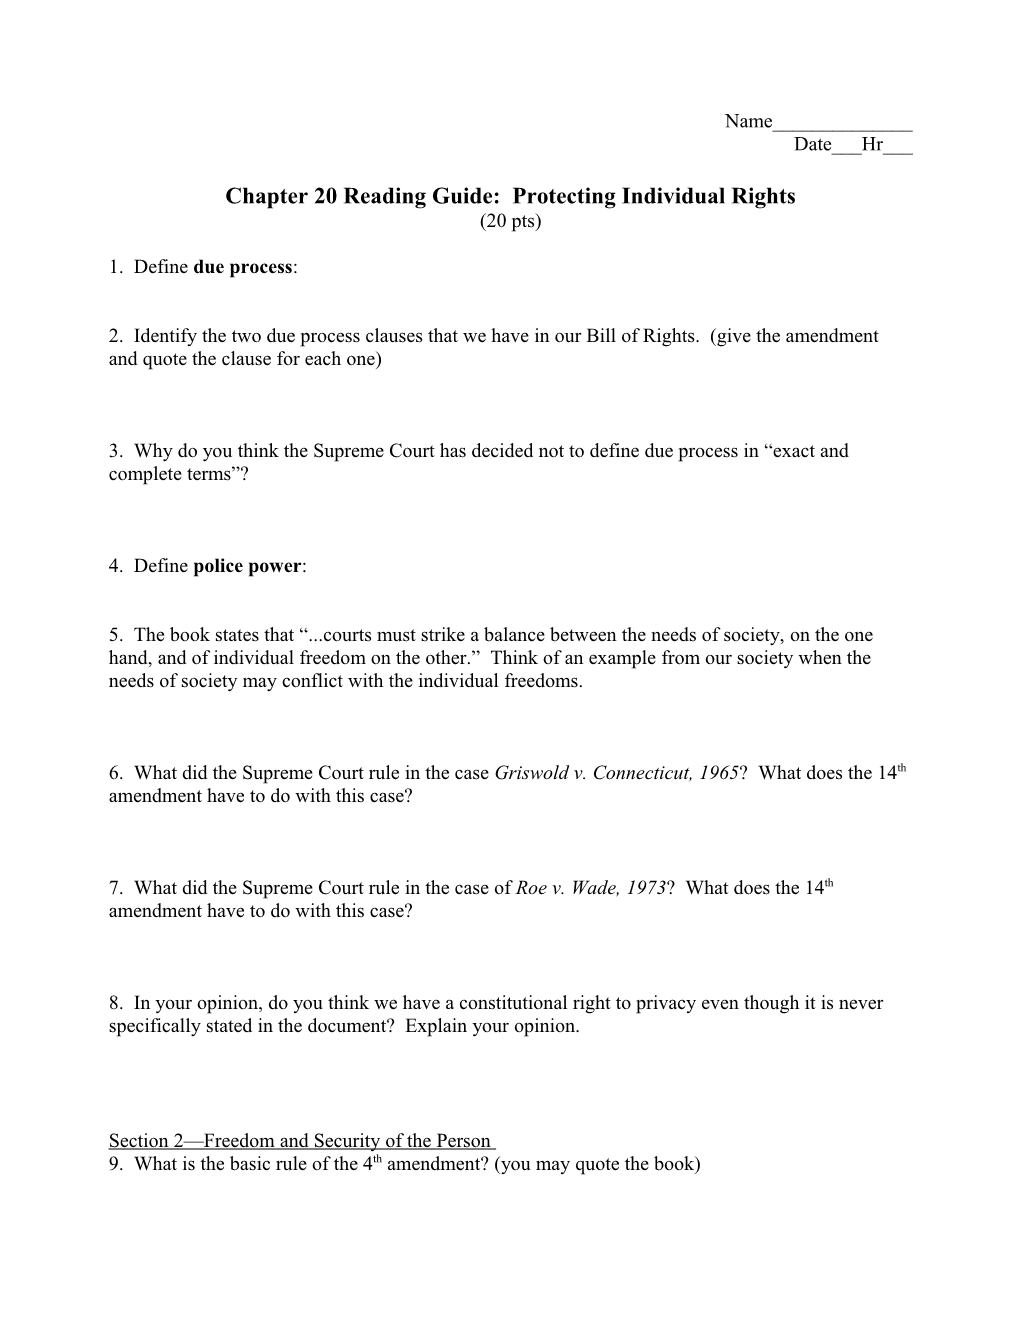 Chapter 20 Reading Guide: Protecting Individual Rights